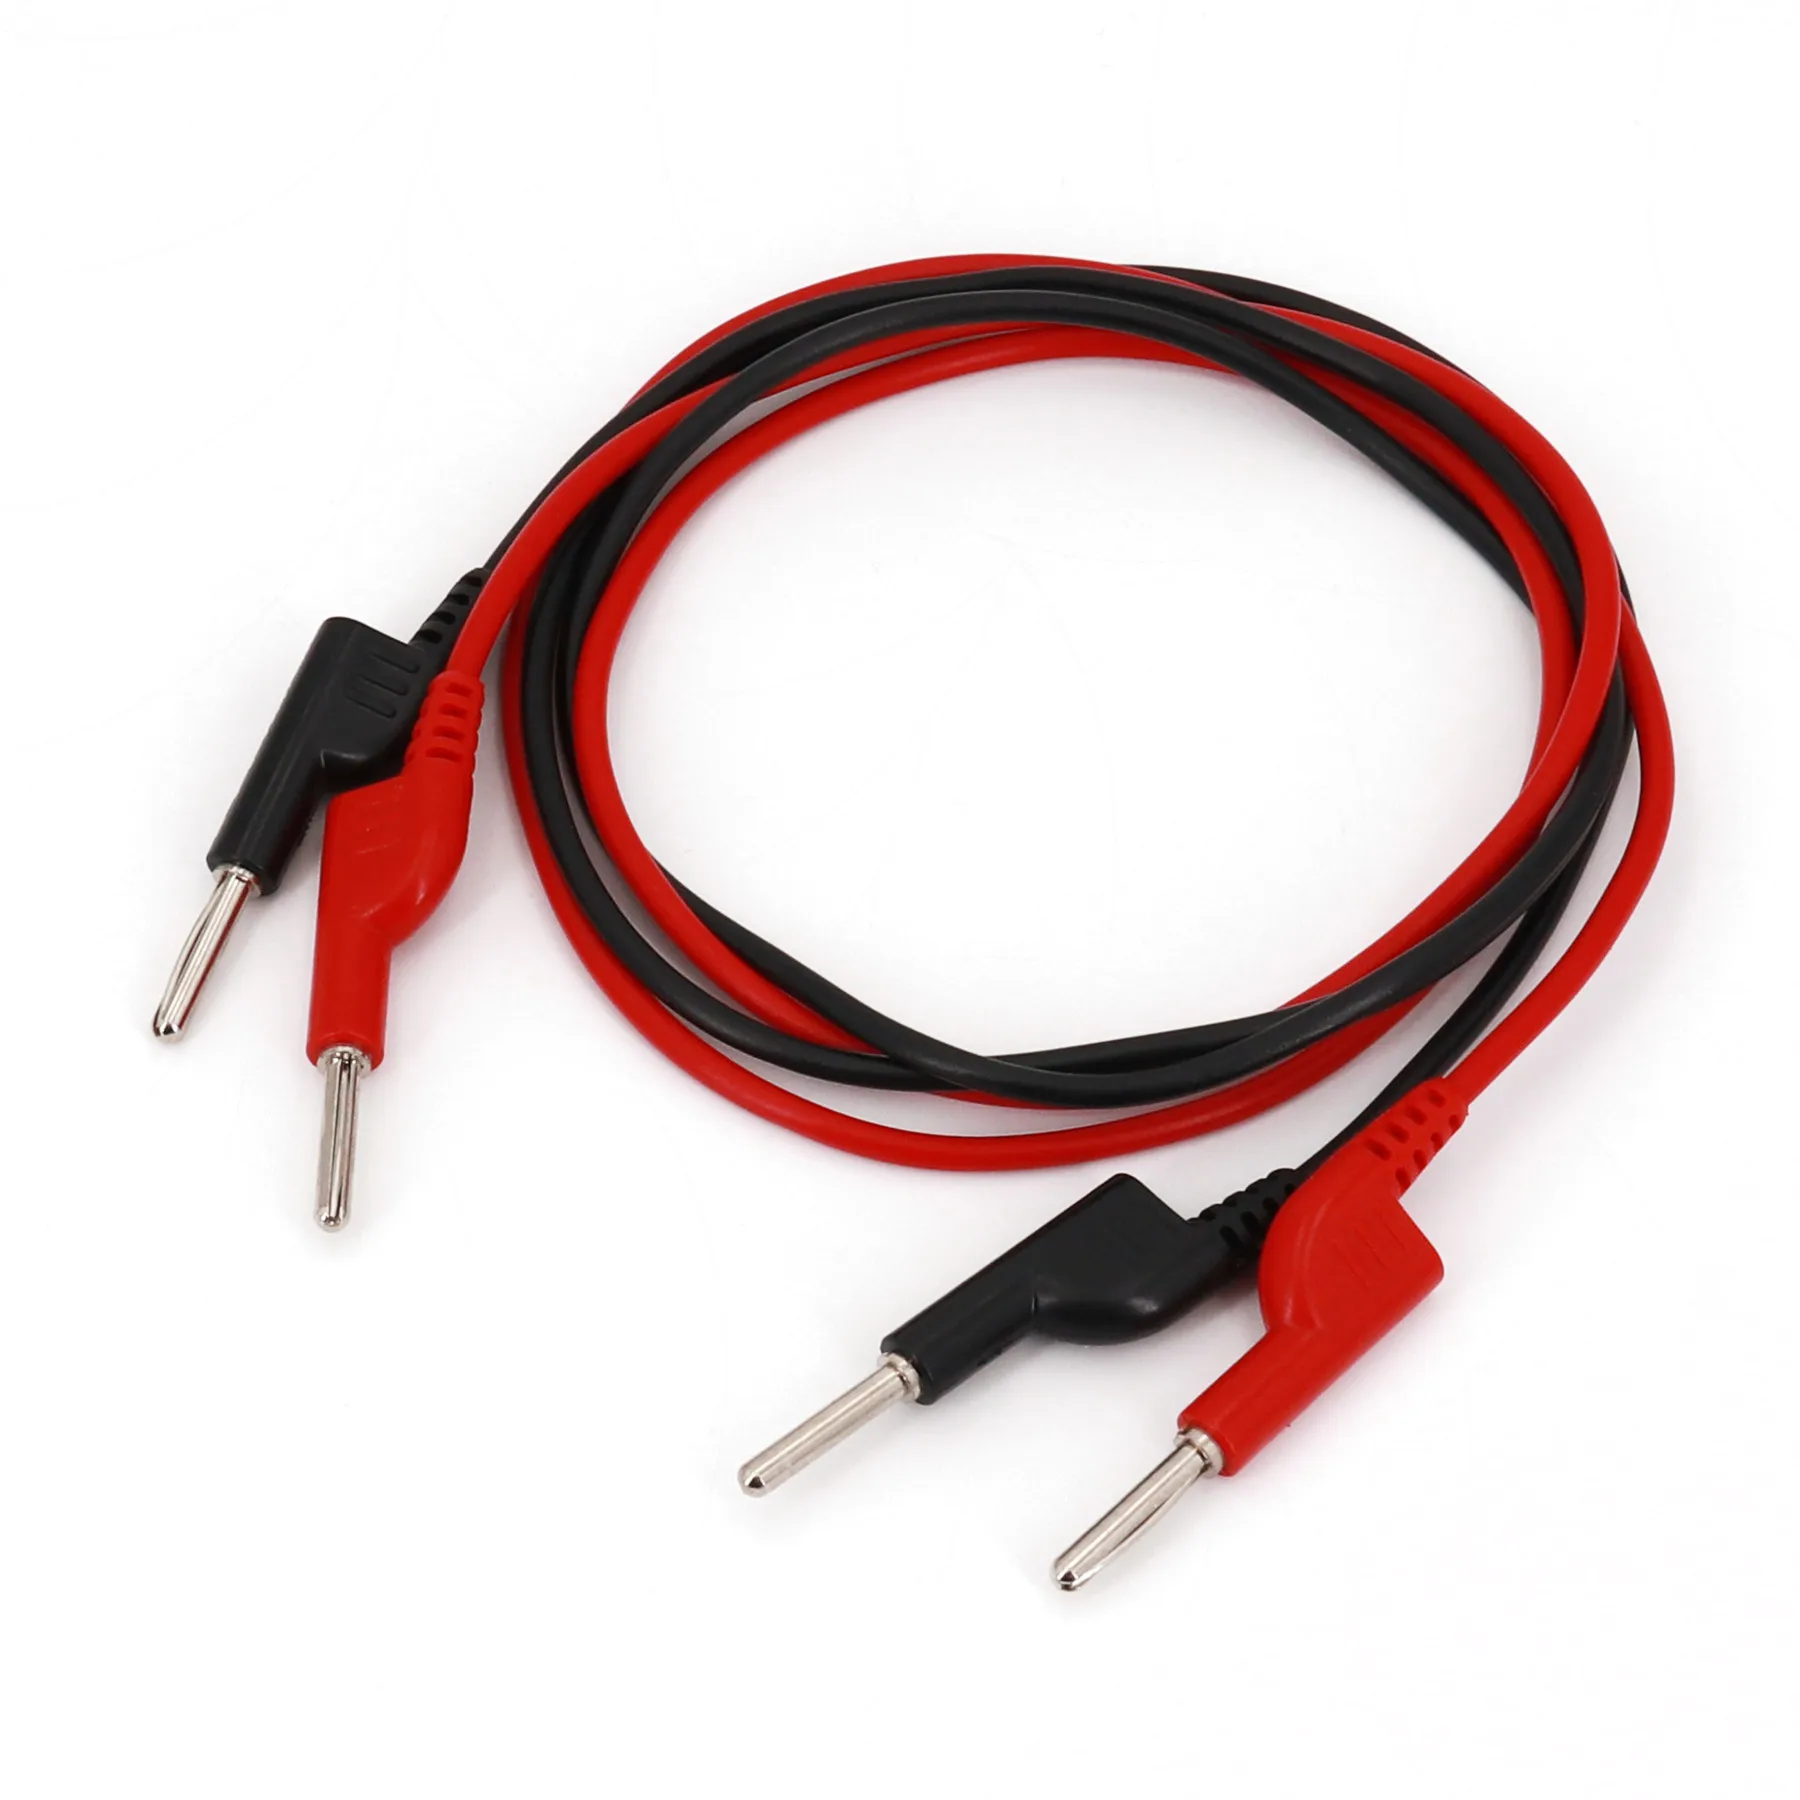 Red&Black Nikou Banana Plug 10 Pcs 4mm Plug Connectors Safety Fully Insulated Stackable Banana Plugs Connectors Multimeter Test Leads Adapter 